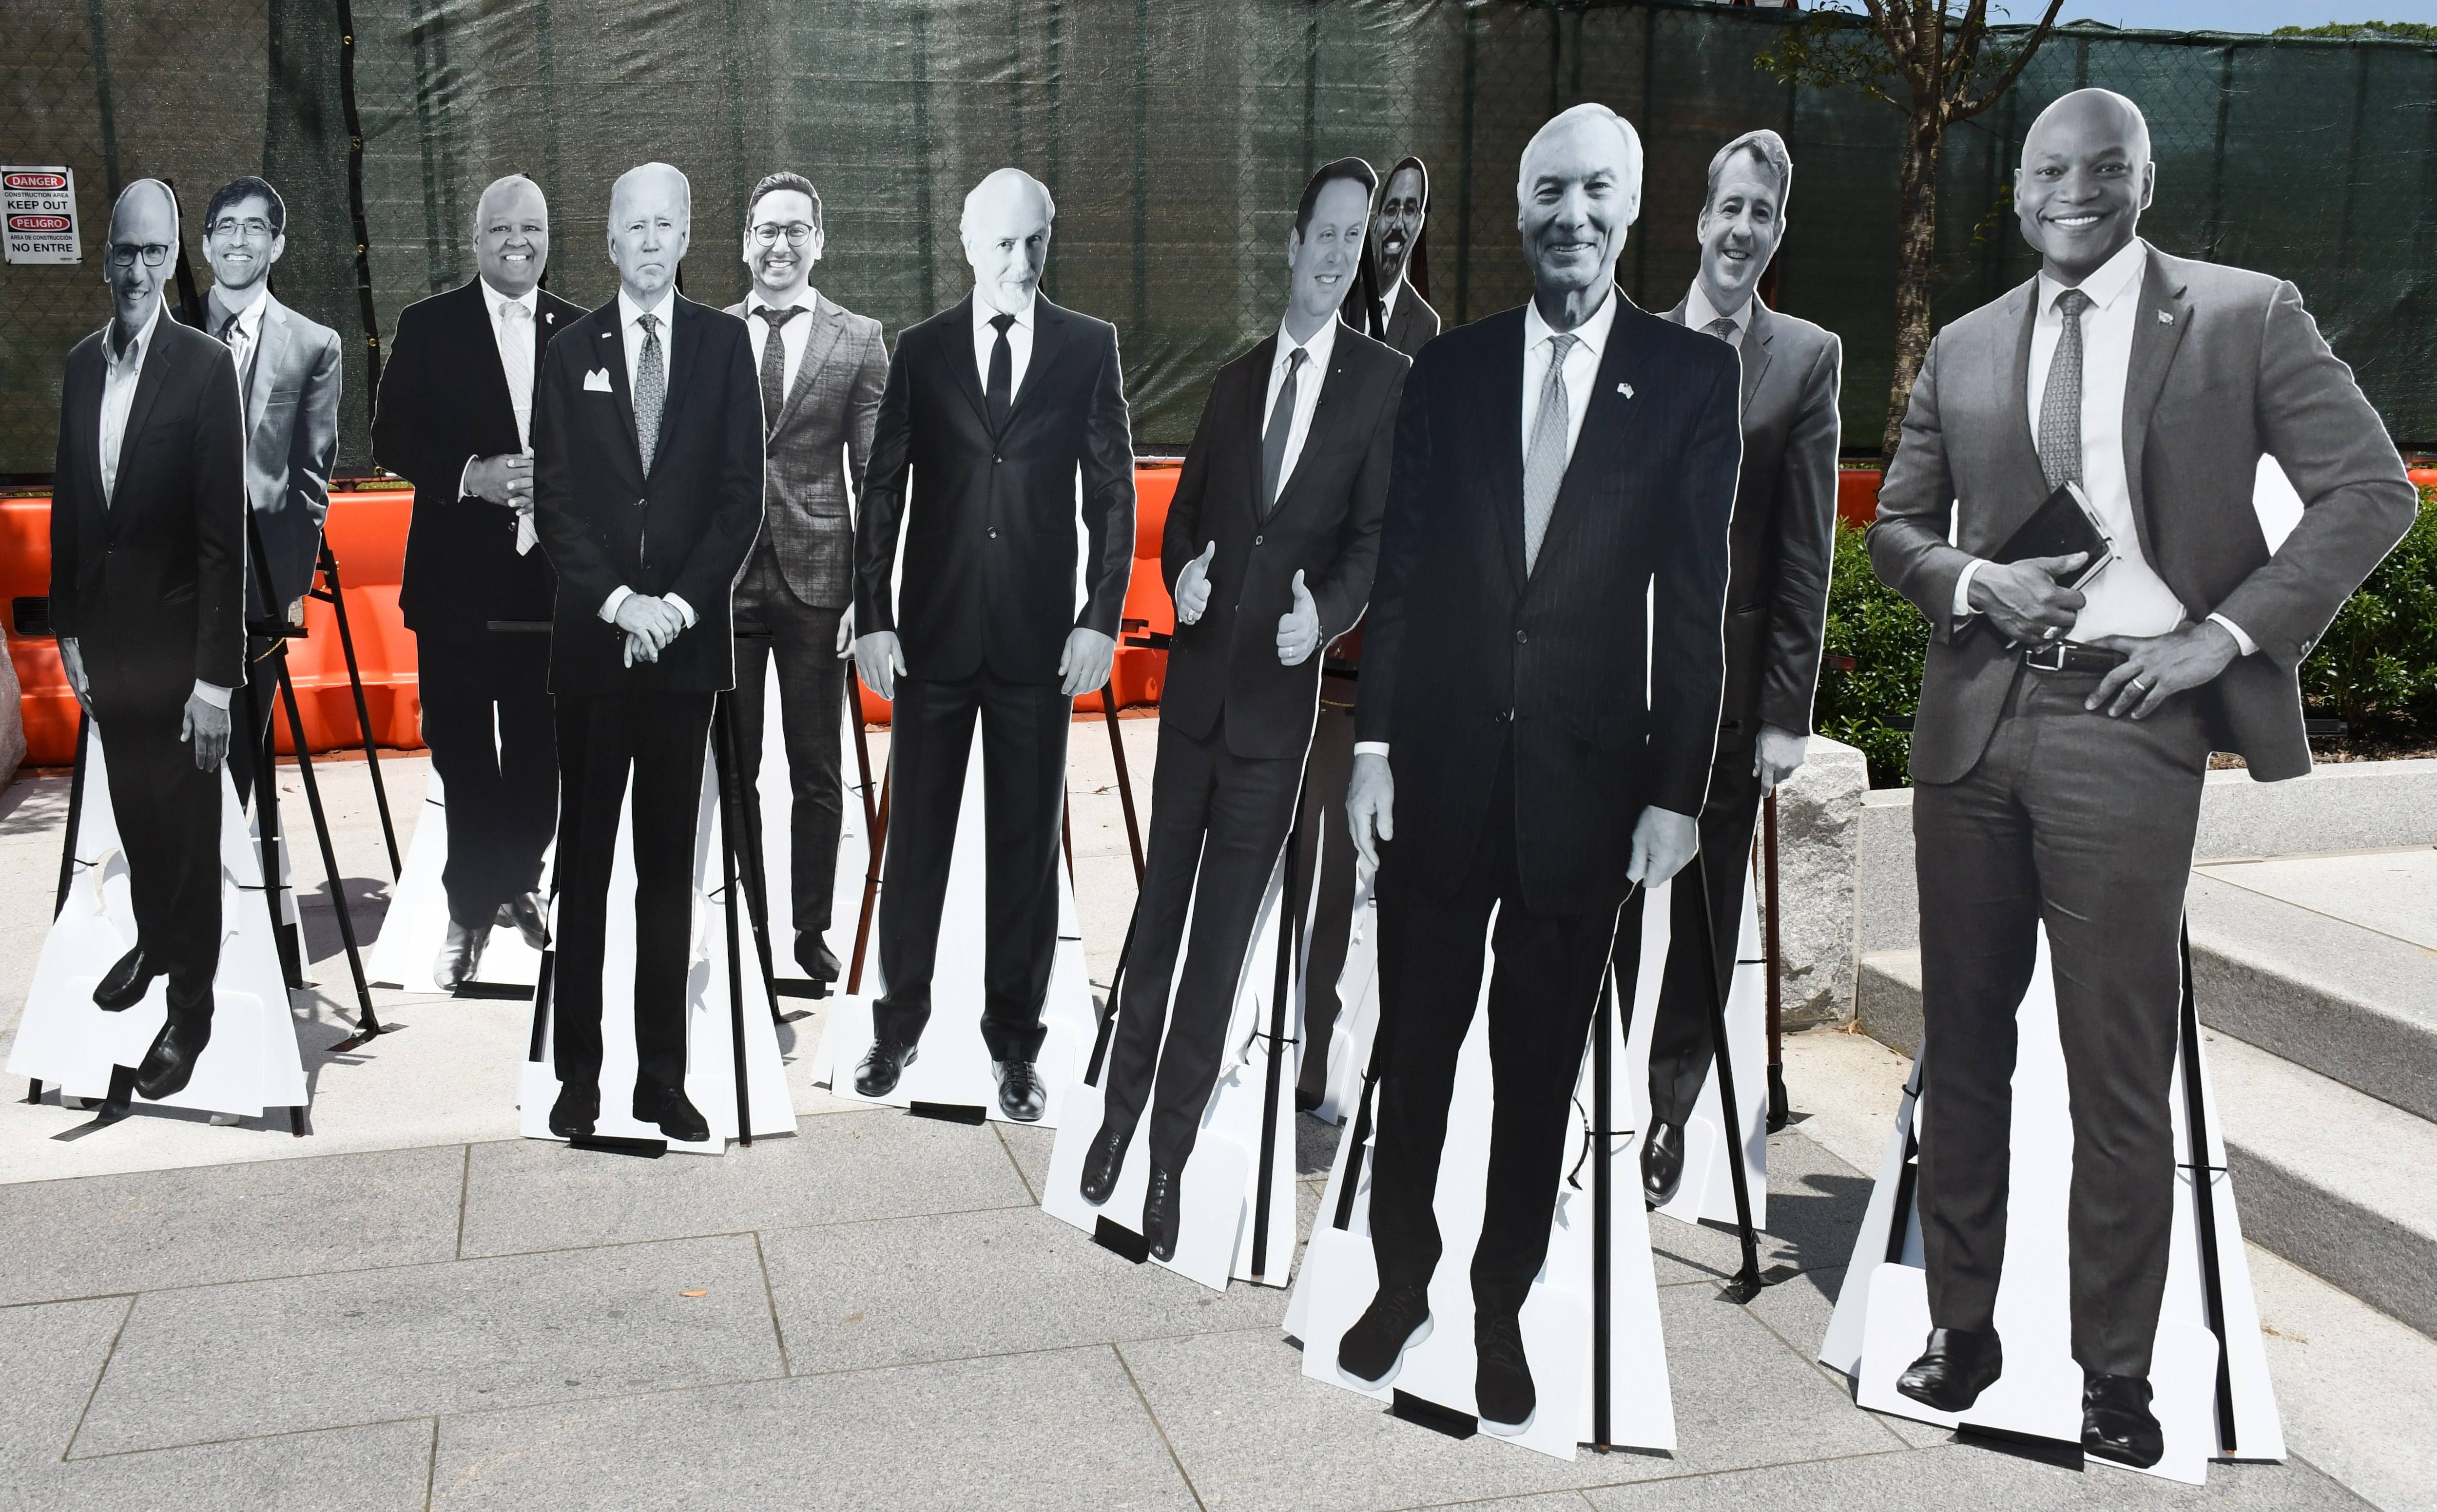 Cardboard cutouts of several candidates for governor -- plus President Joe Biden -- are put on display by Kelly Schulz's campaign team for an event at Lawyers Mall in Annapolis on July 14, 2022.